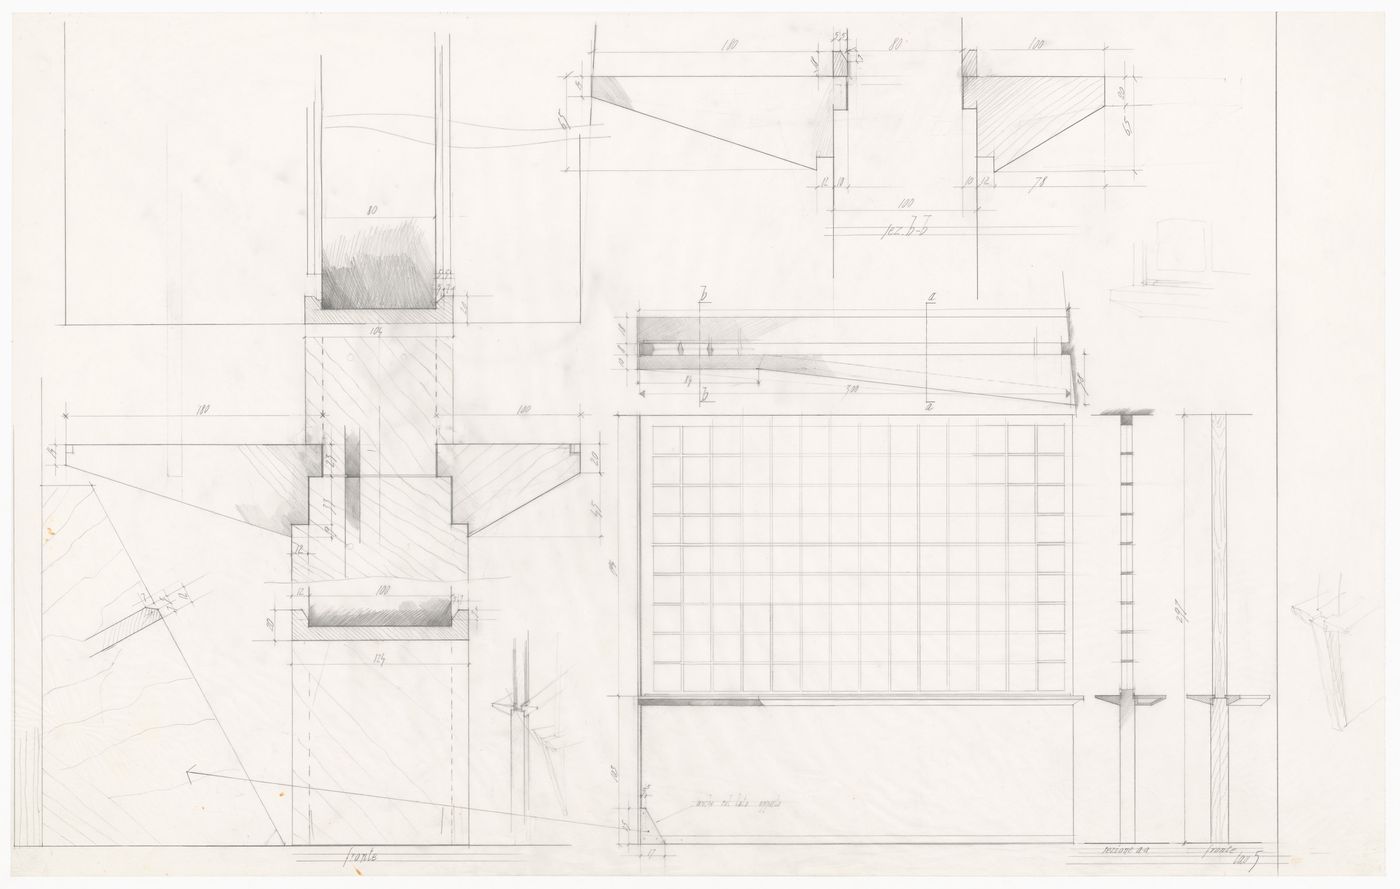 Sections and details for Casa De Paolini, Milan, Italy